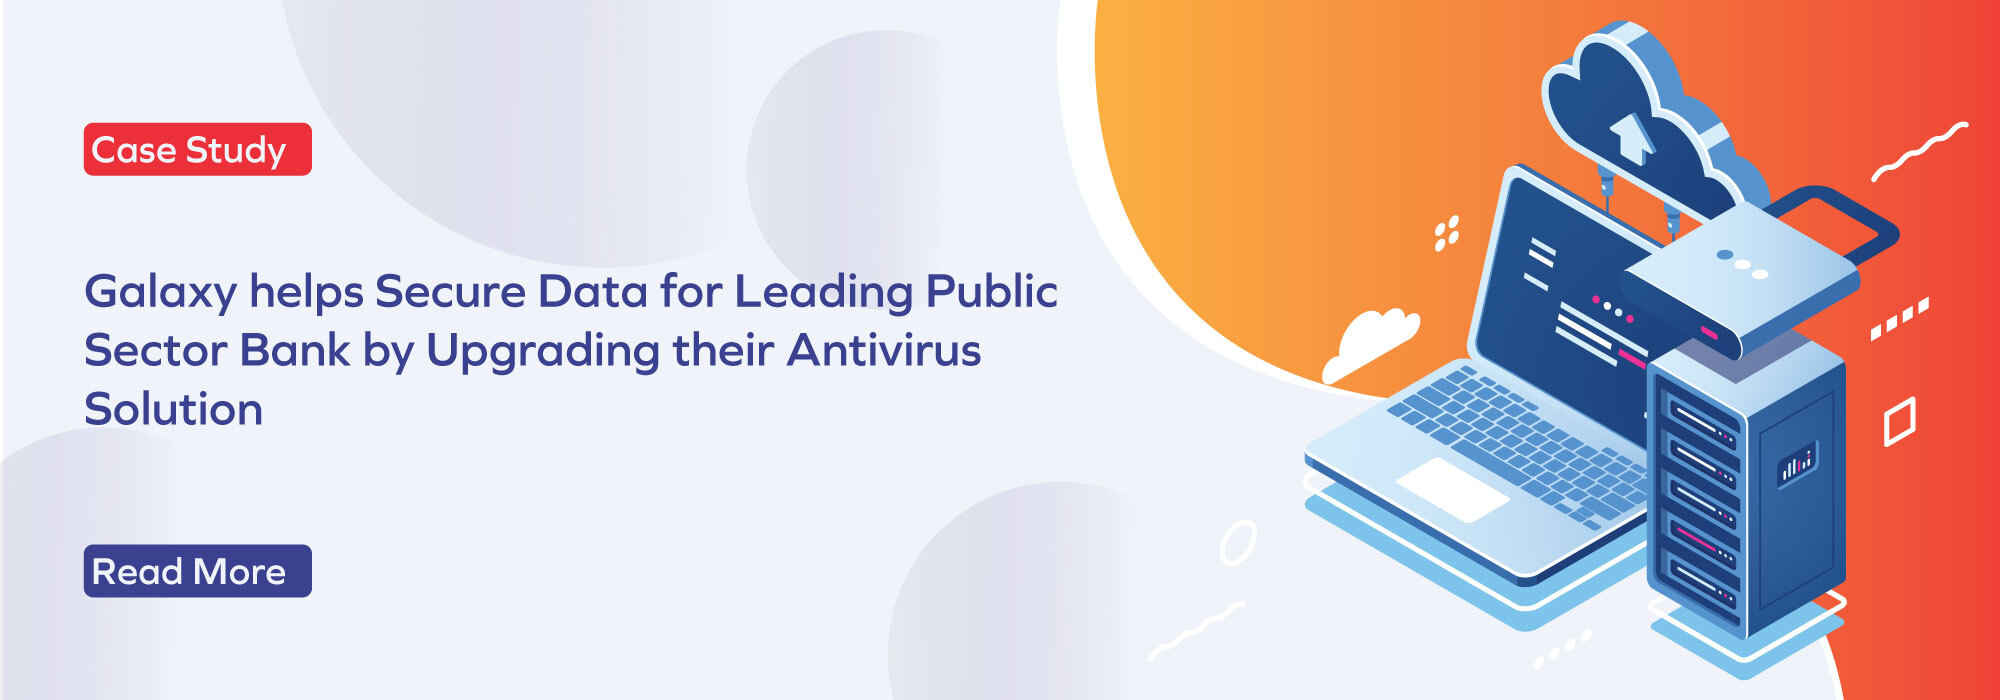 Leading public sector bank secured data by upgrading Antivirus solution